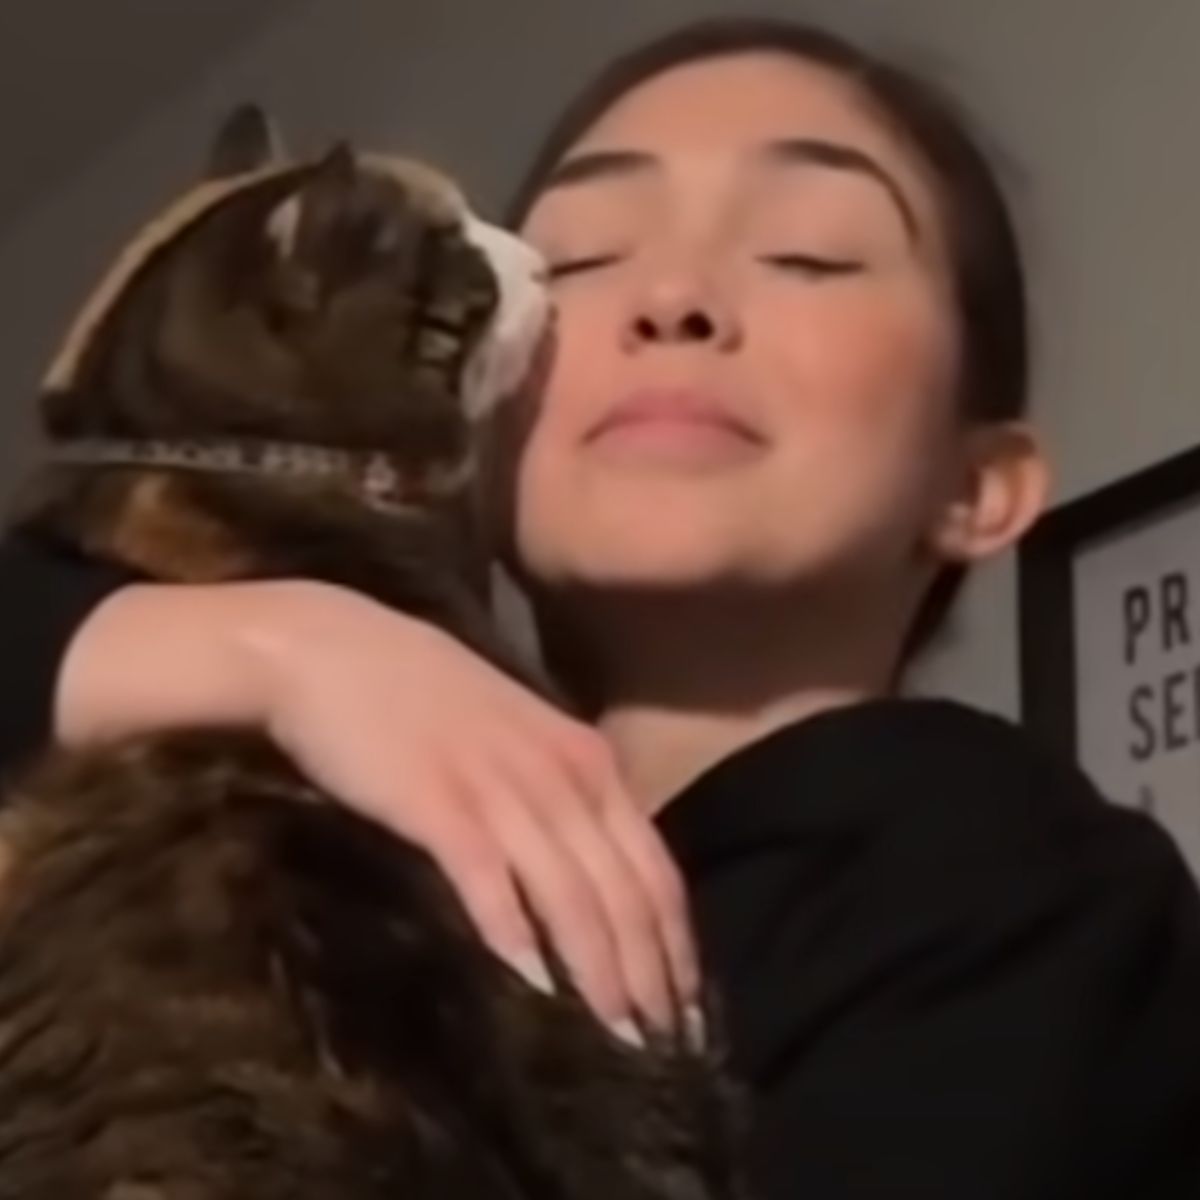 cat licking woman's face